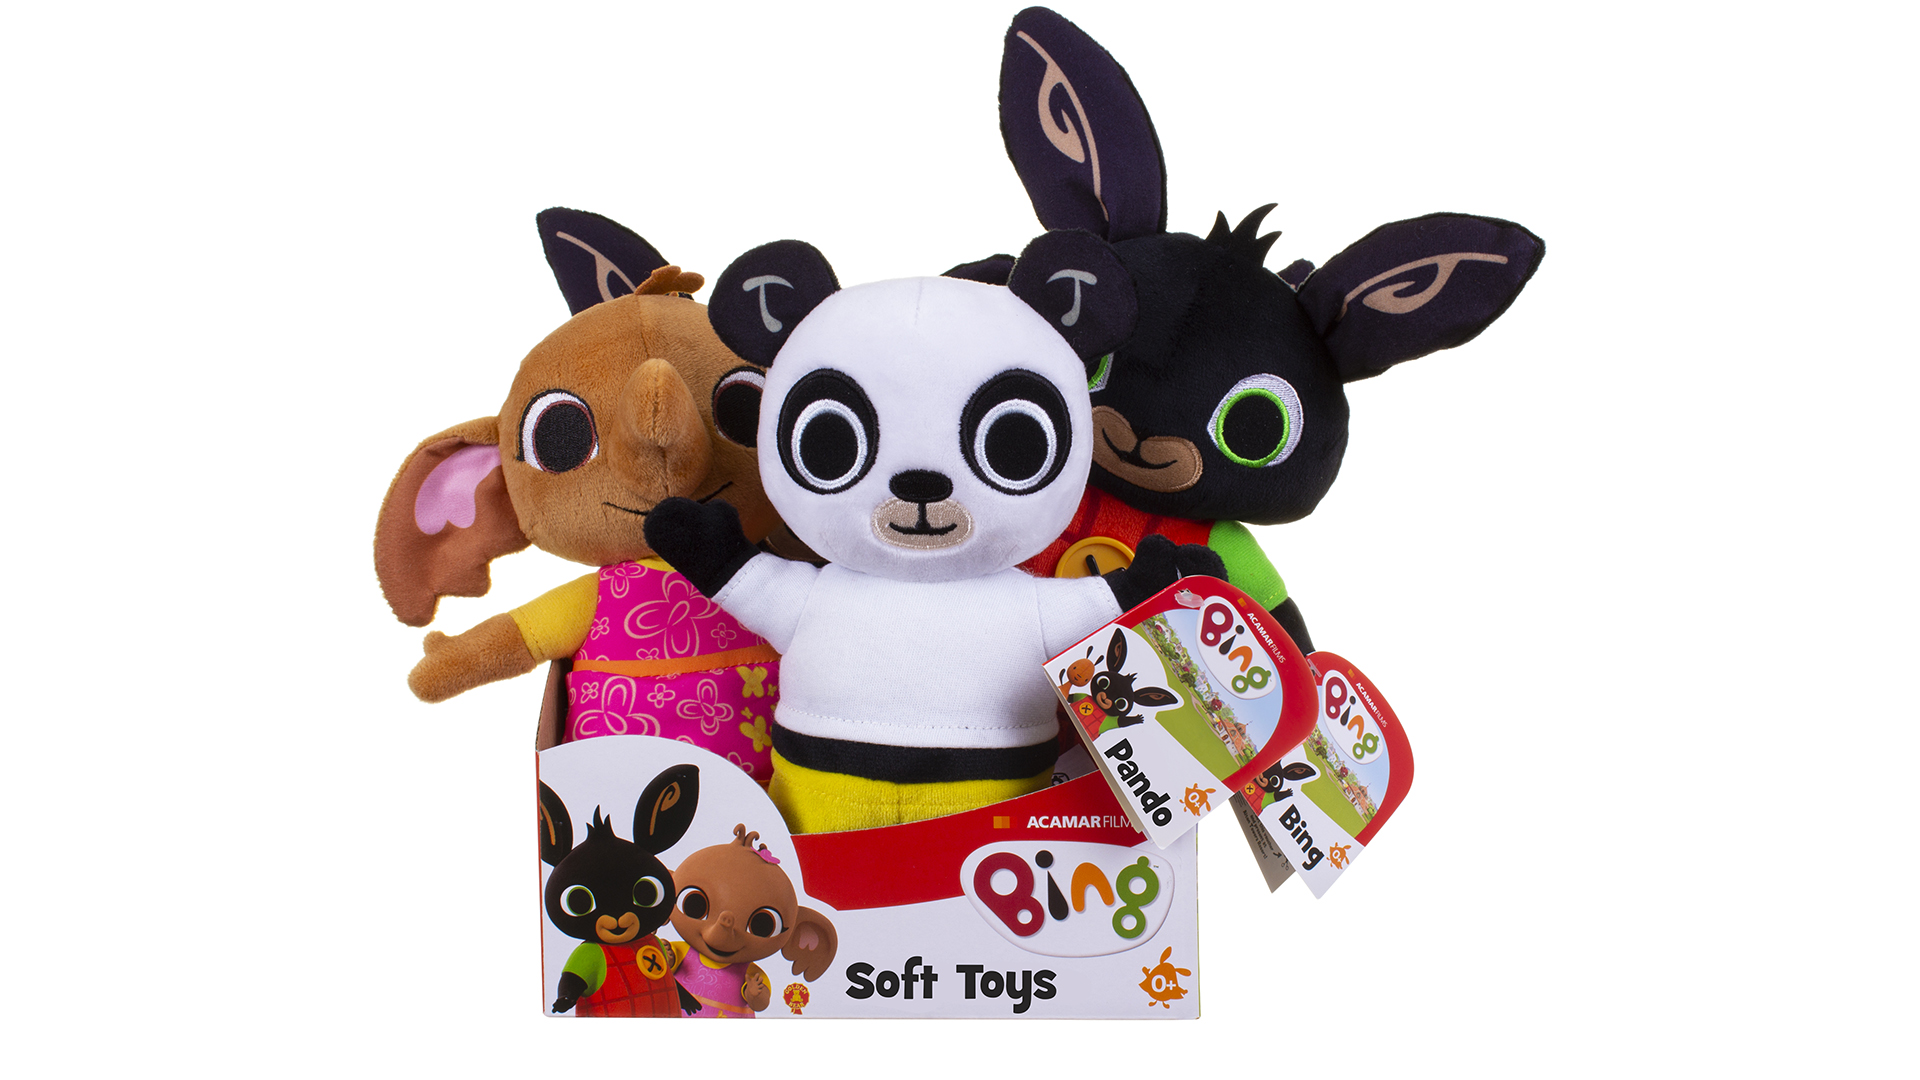 Bing Bunny Cbeebies Bing Toys Soft Toys For Kids Kids Play O'Clock Toys ...